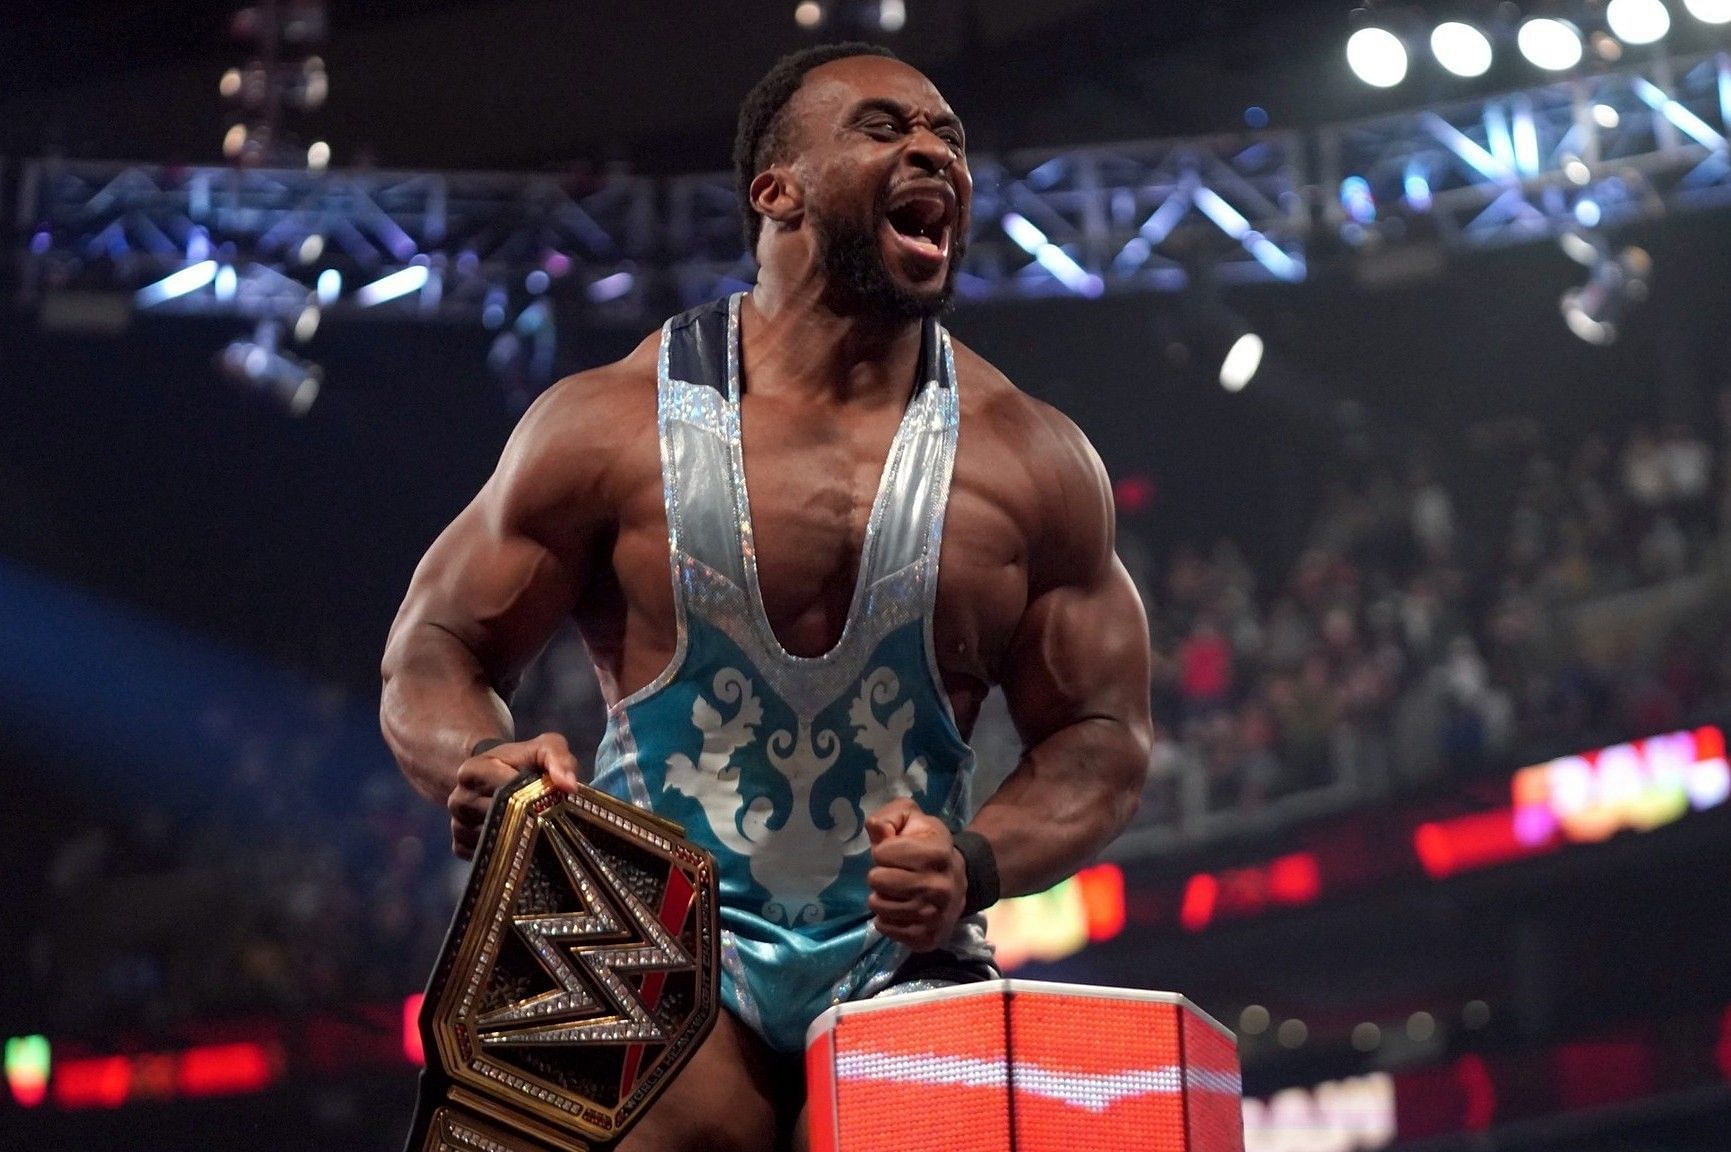 Big E will face Kevin Owens in the main event of RAW